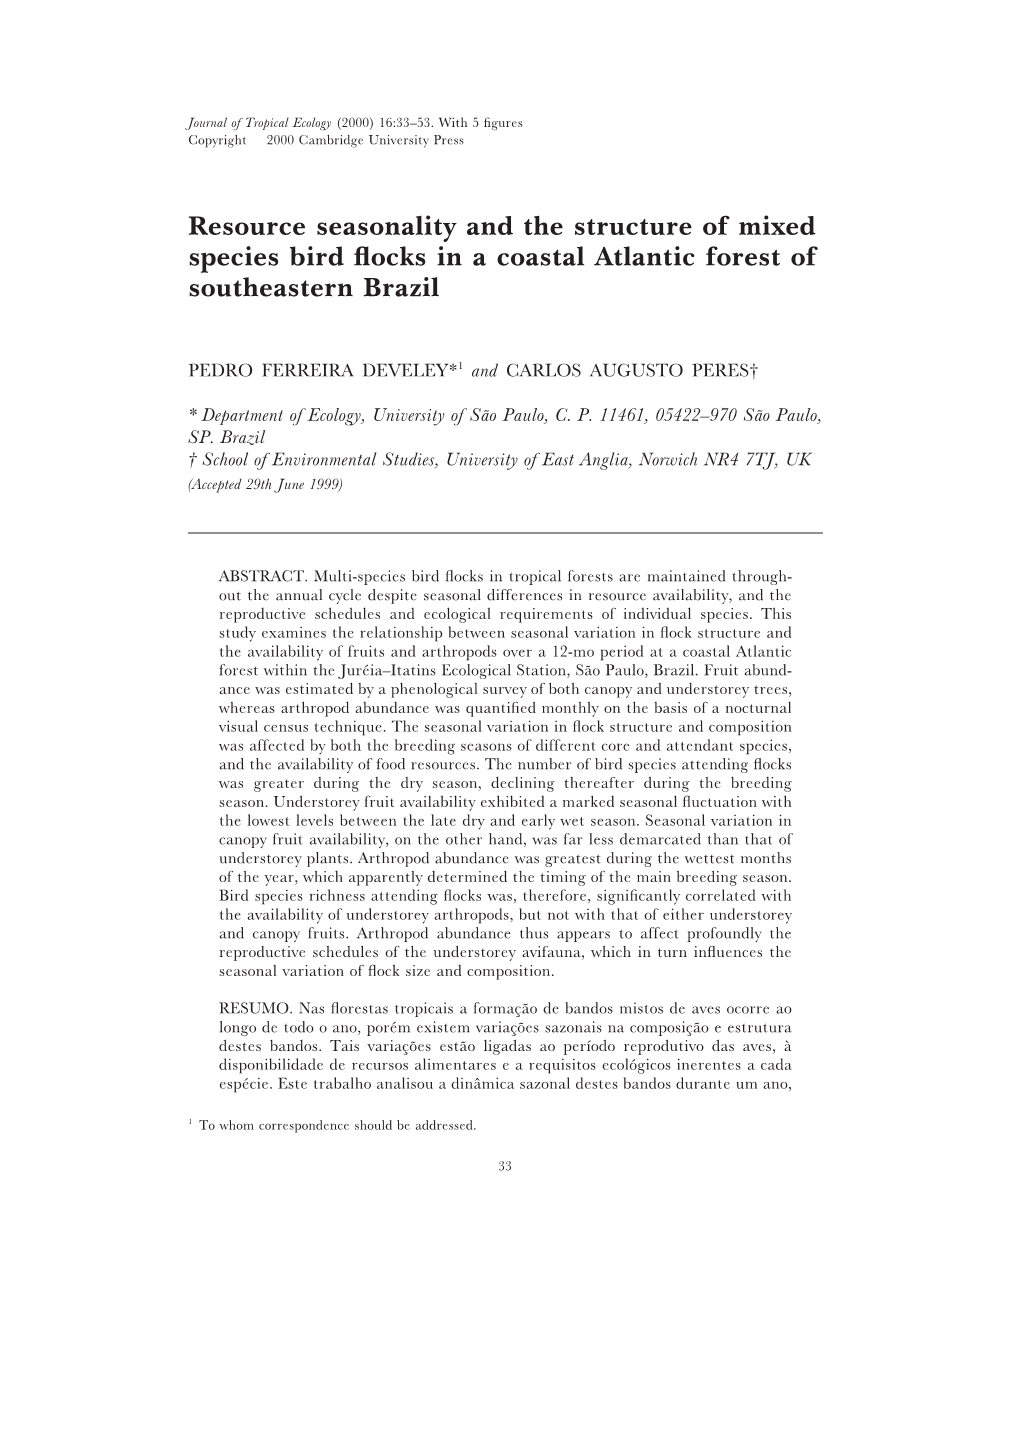 Resource Seasonality and the Structure of Mixed Species Bird ﬂocks in a Coastal Atlantic Forest of Southeastern Brazil